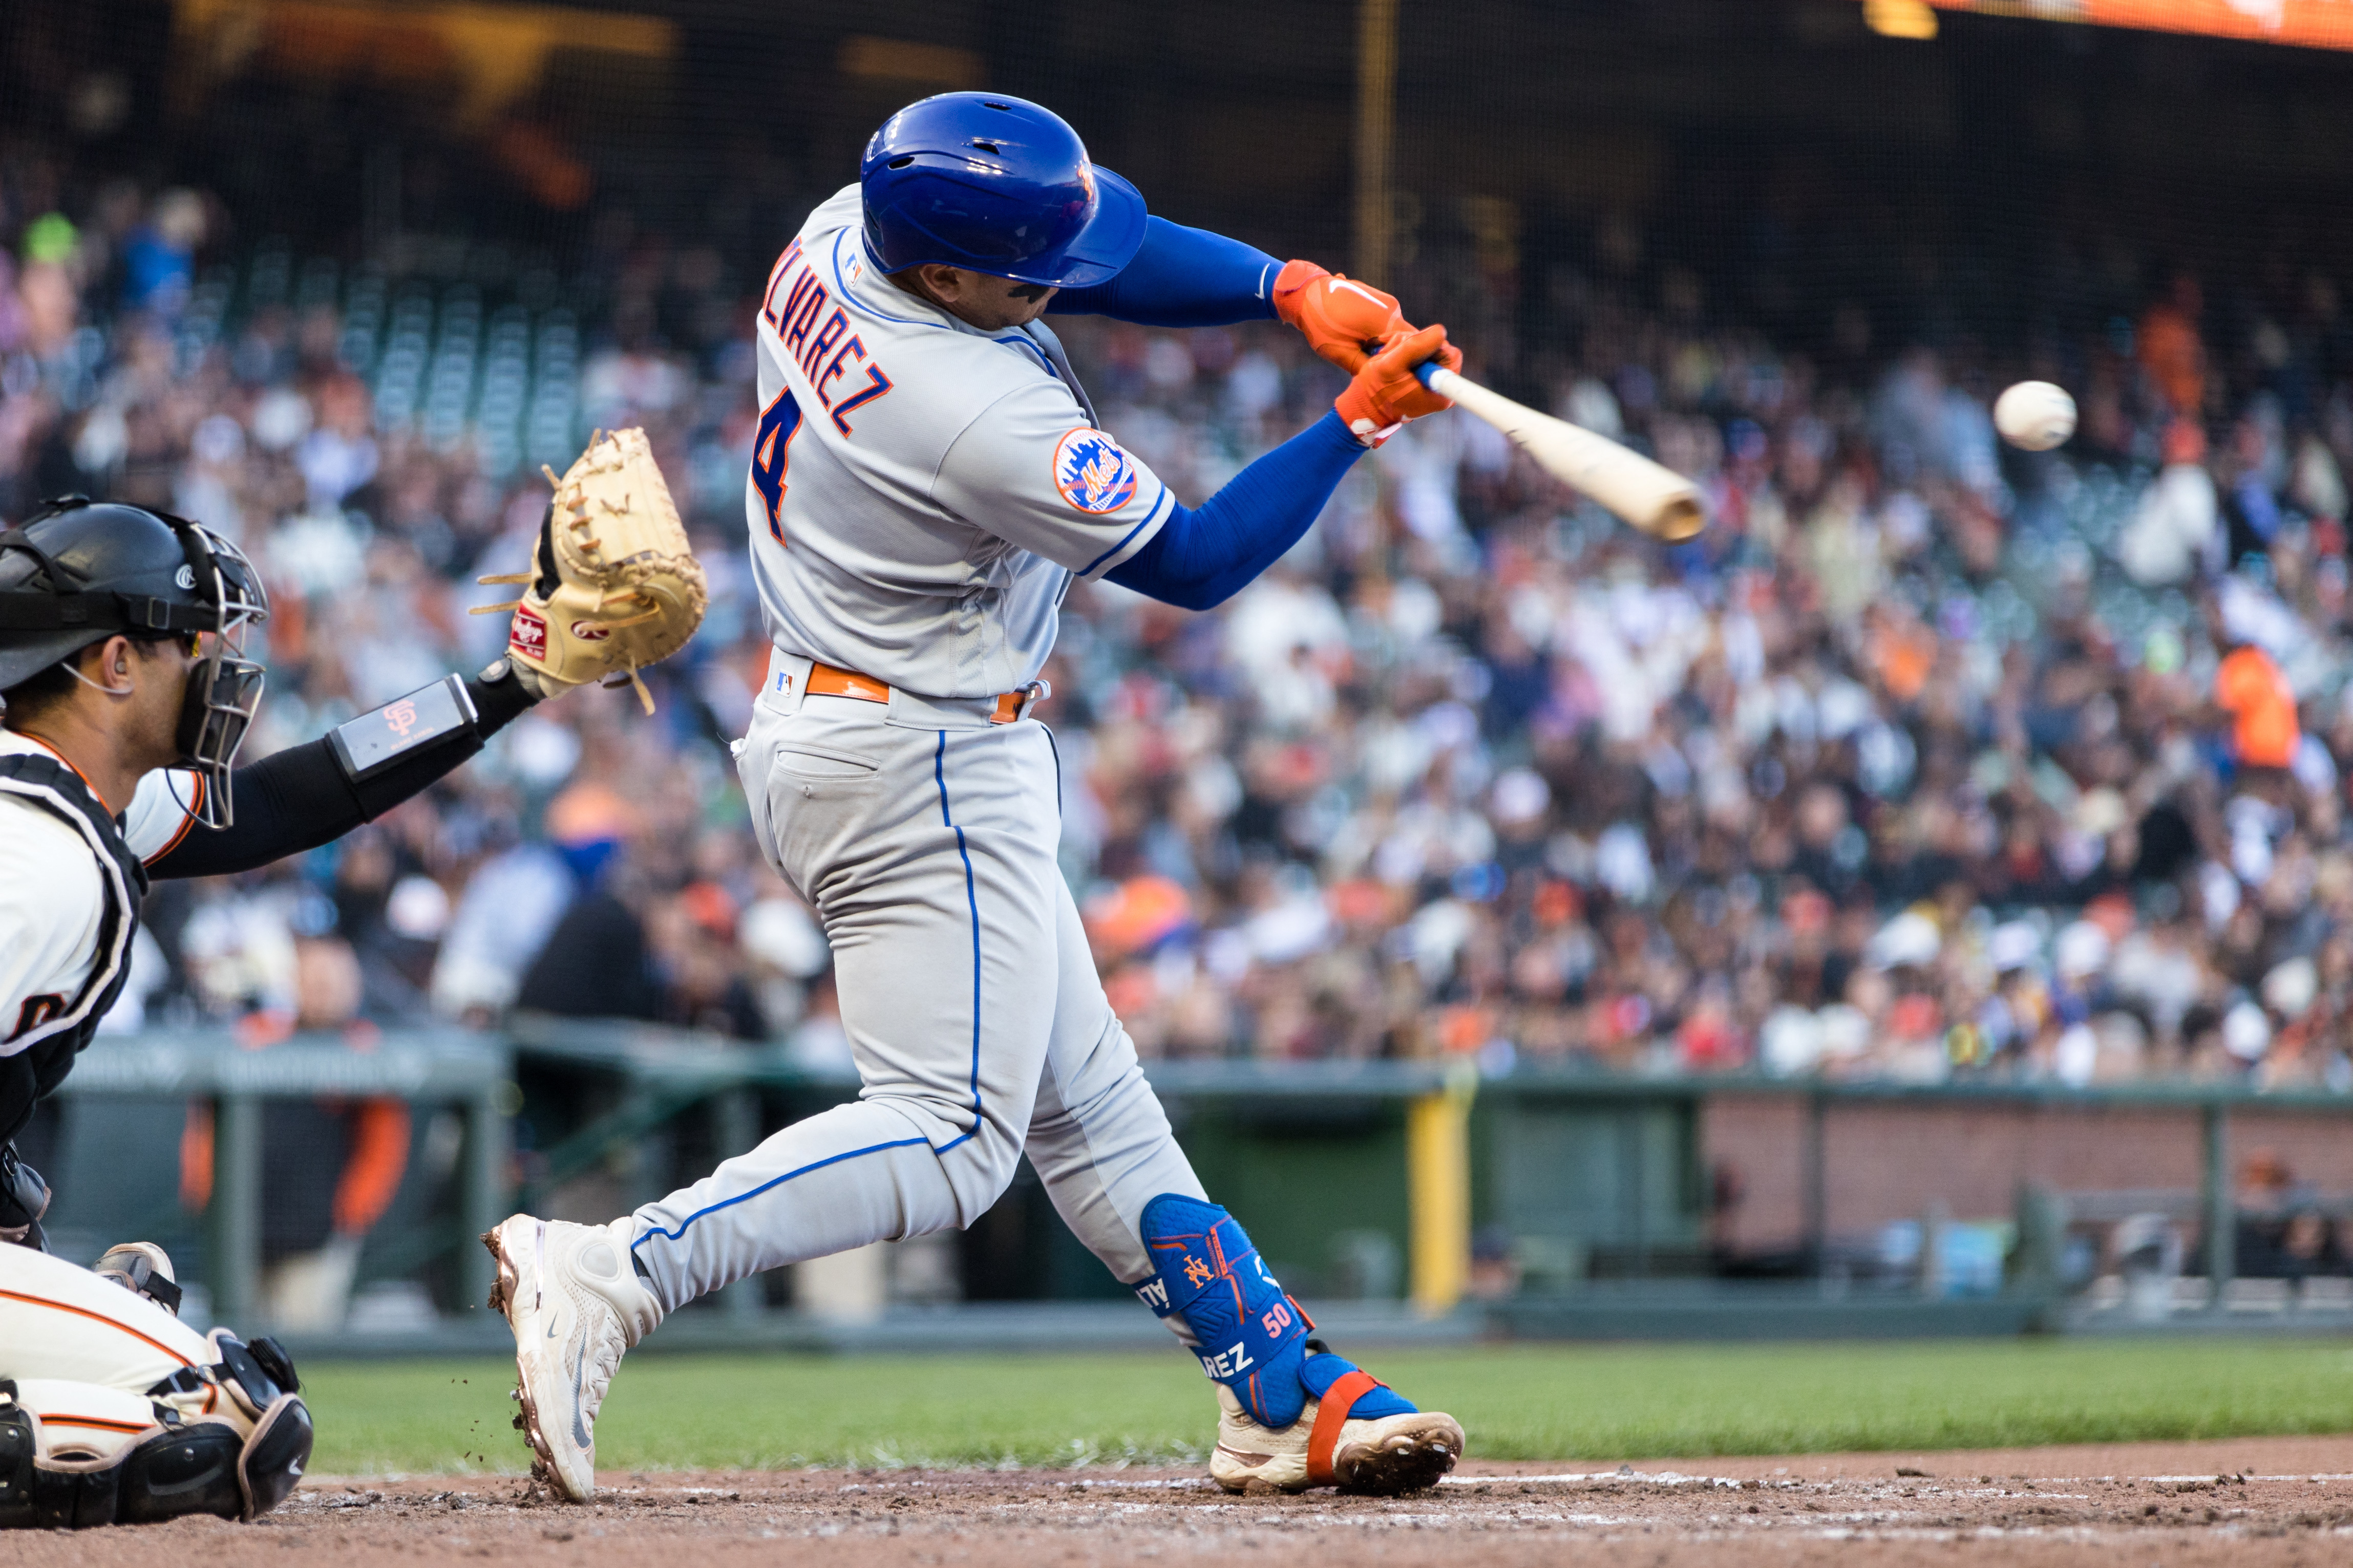 Giants' second straight win earns series split with Mets